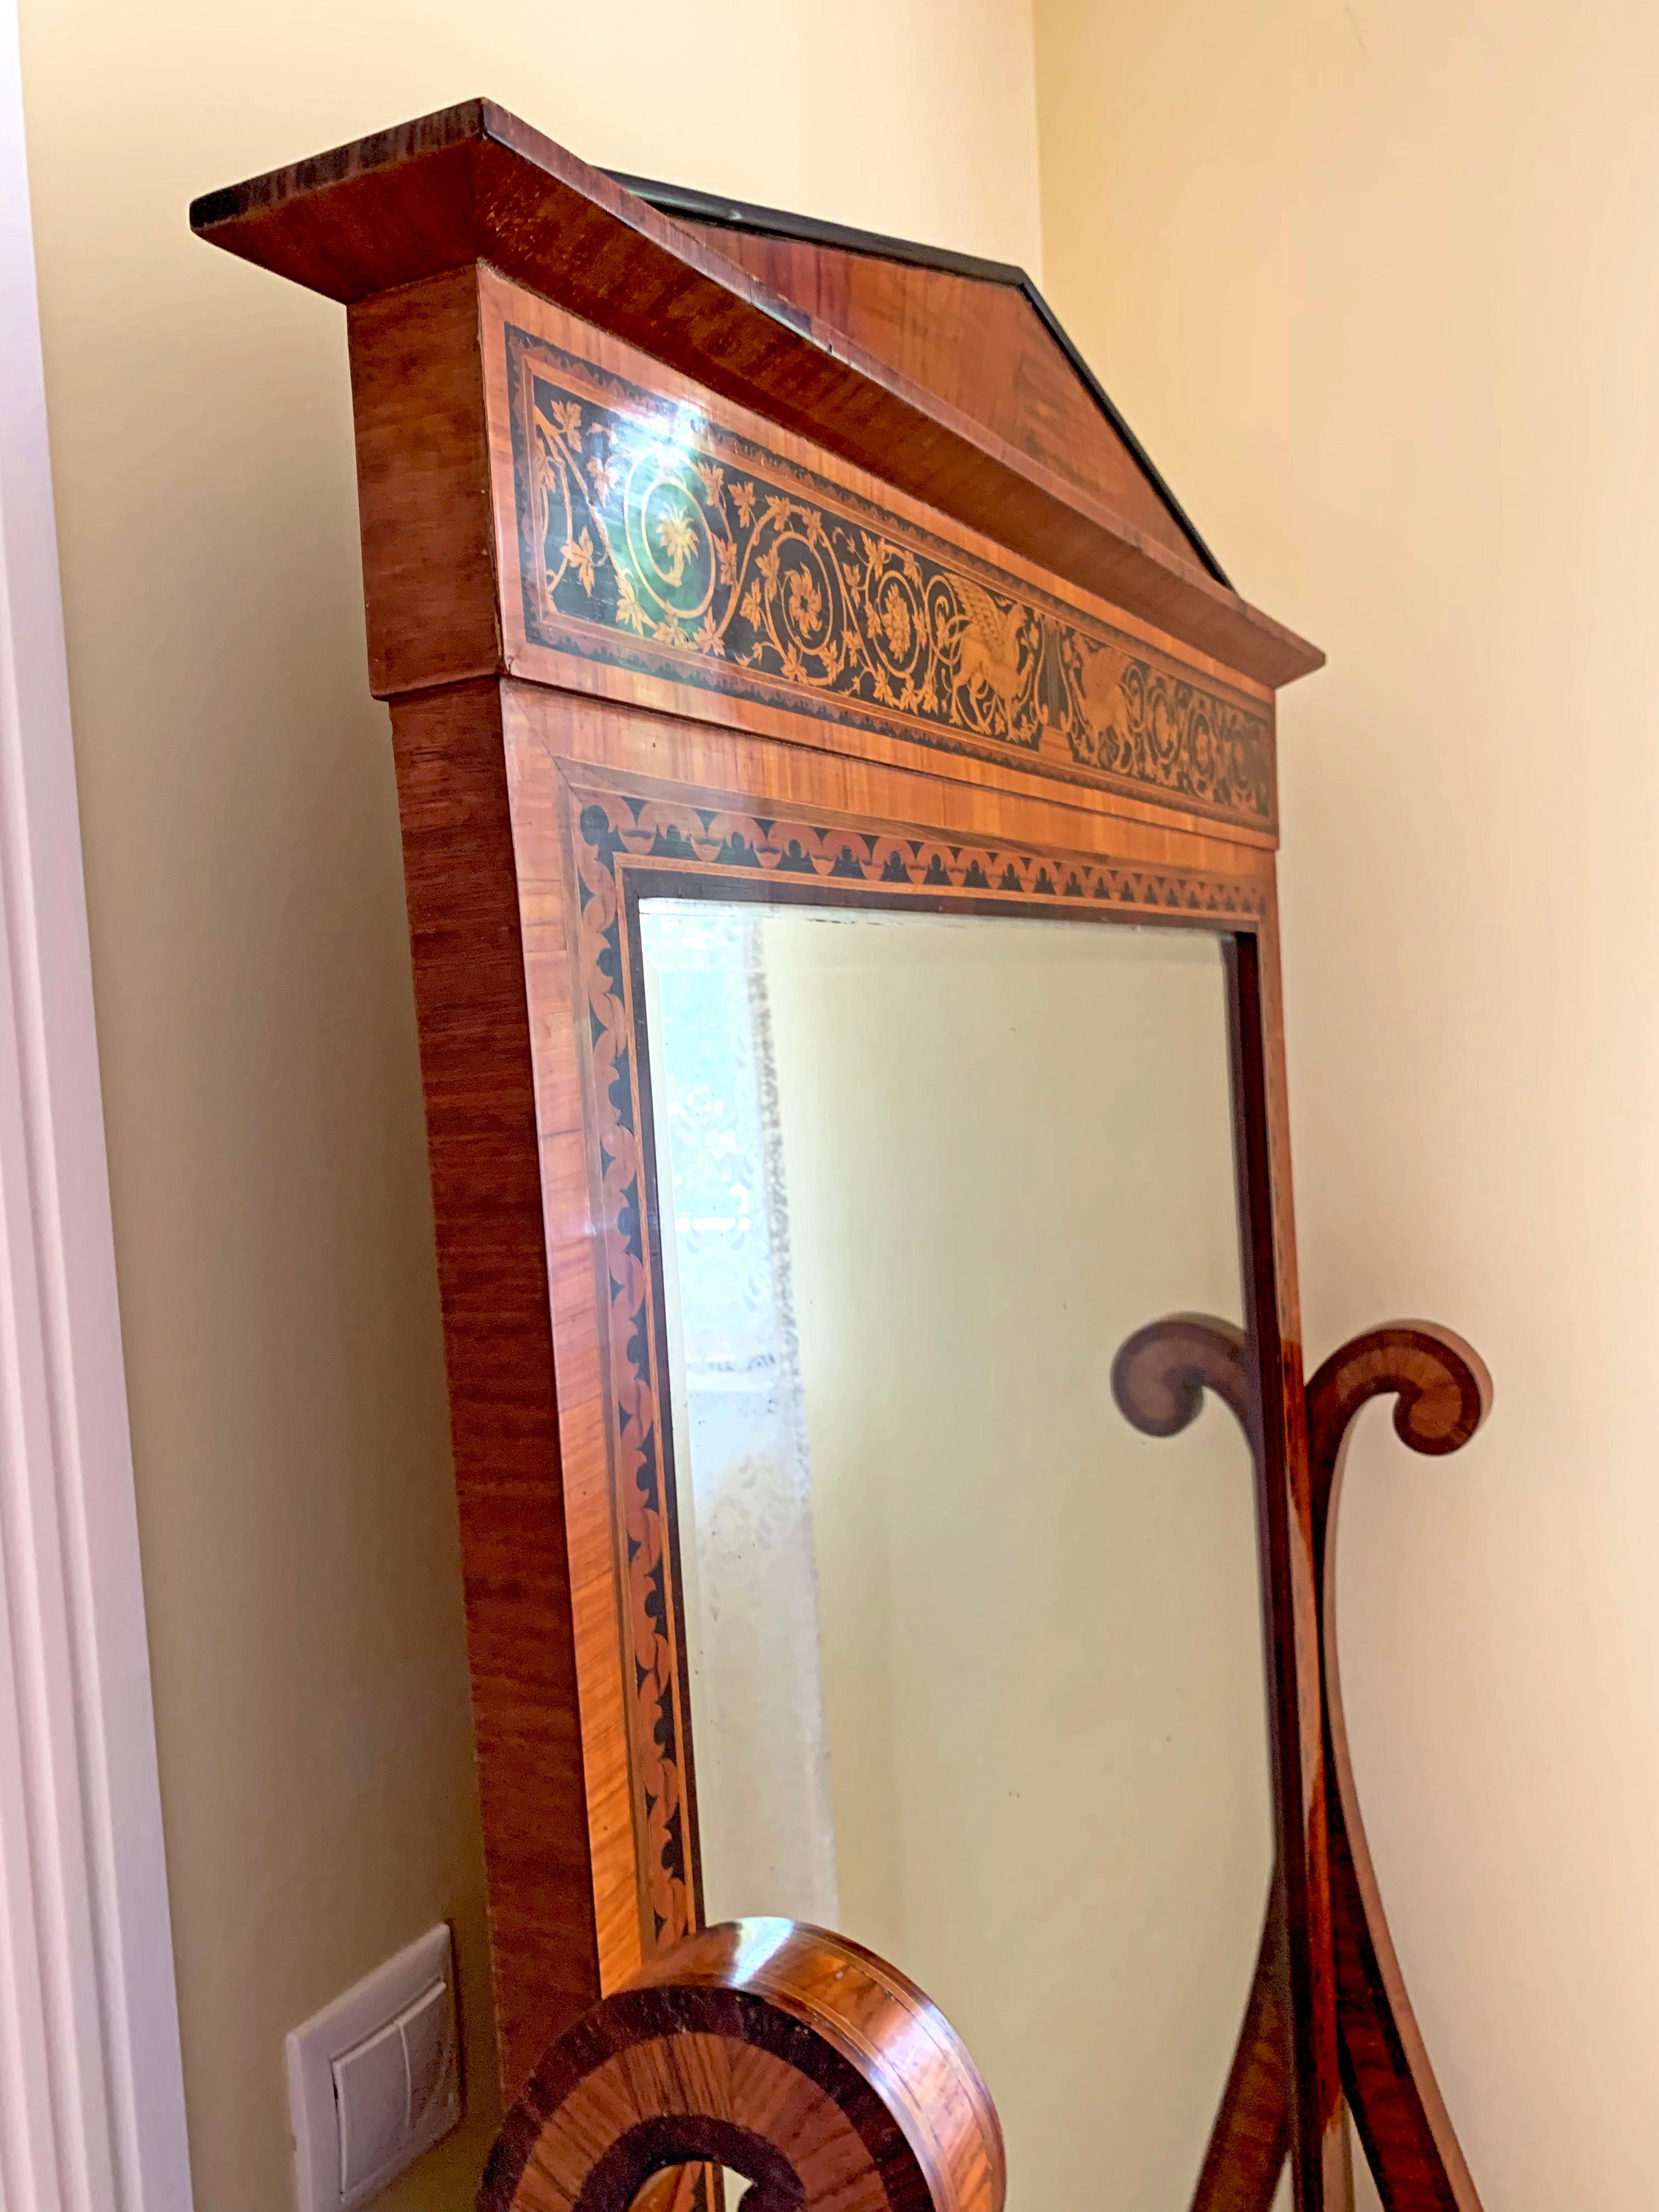 Beautiful late 19th century rosewood full length standing mirror with marquetry in black wood. The angle of the mirror is changeable and fixable on the side. The details of the marquetry show magnificent crafting skills. The legs are bend in a